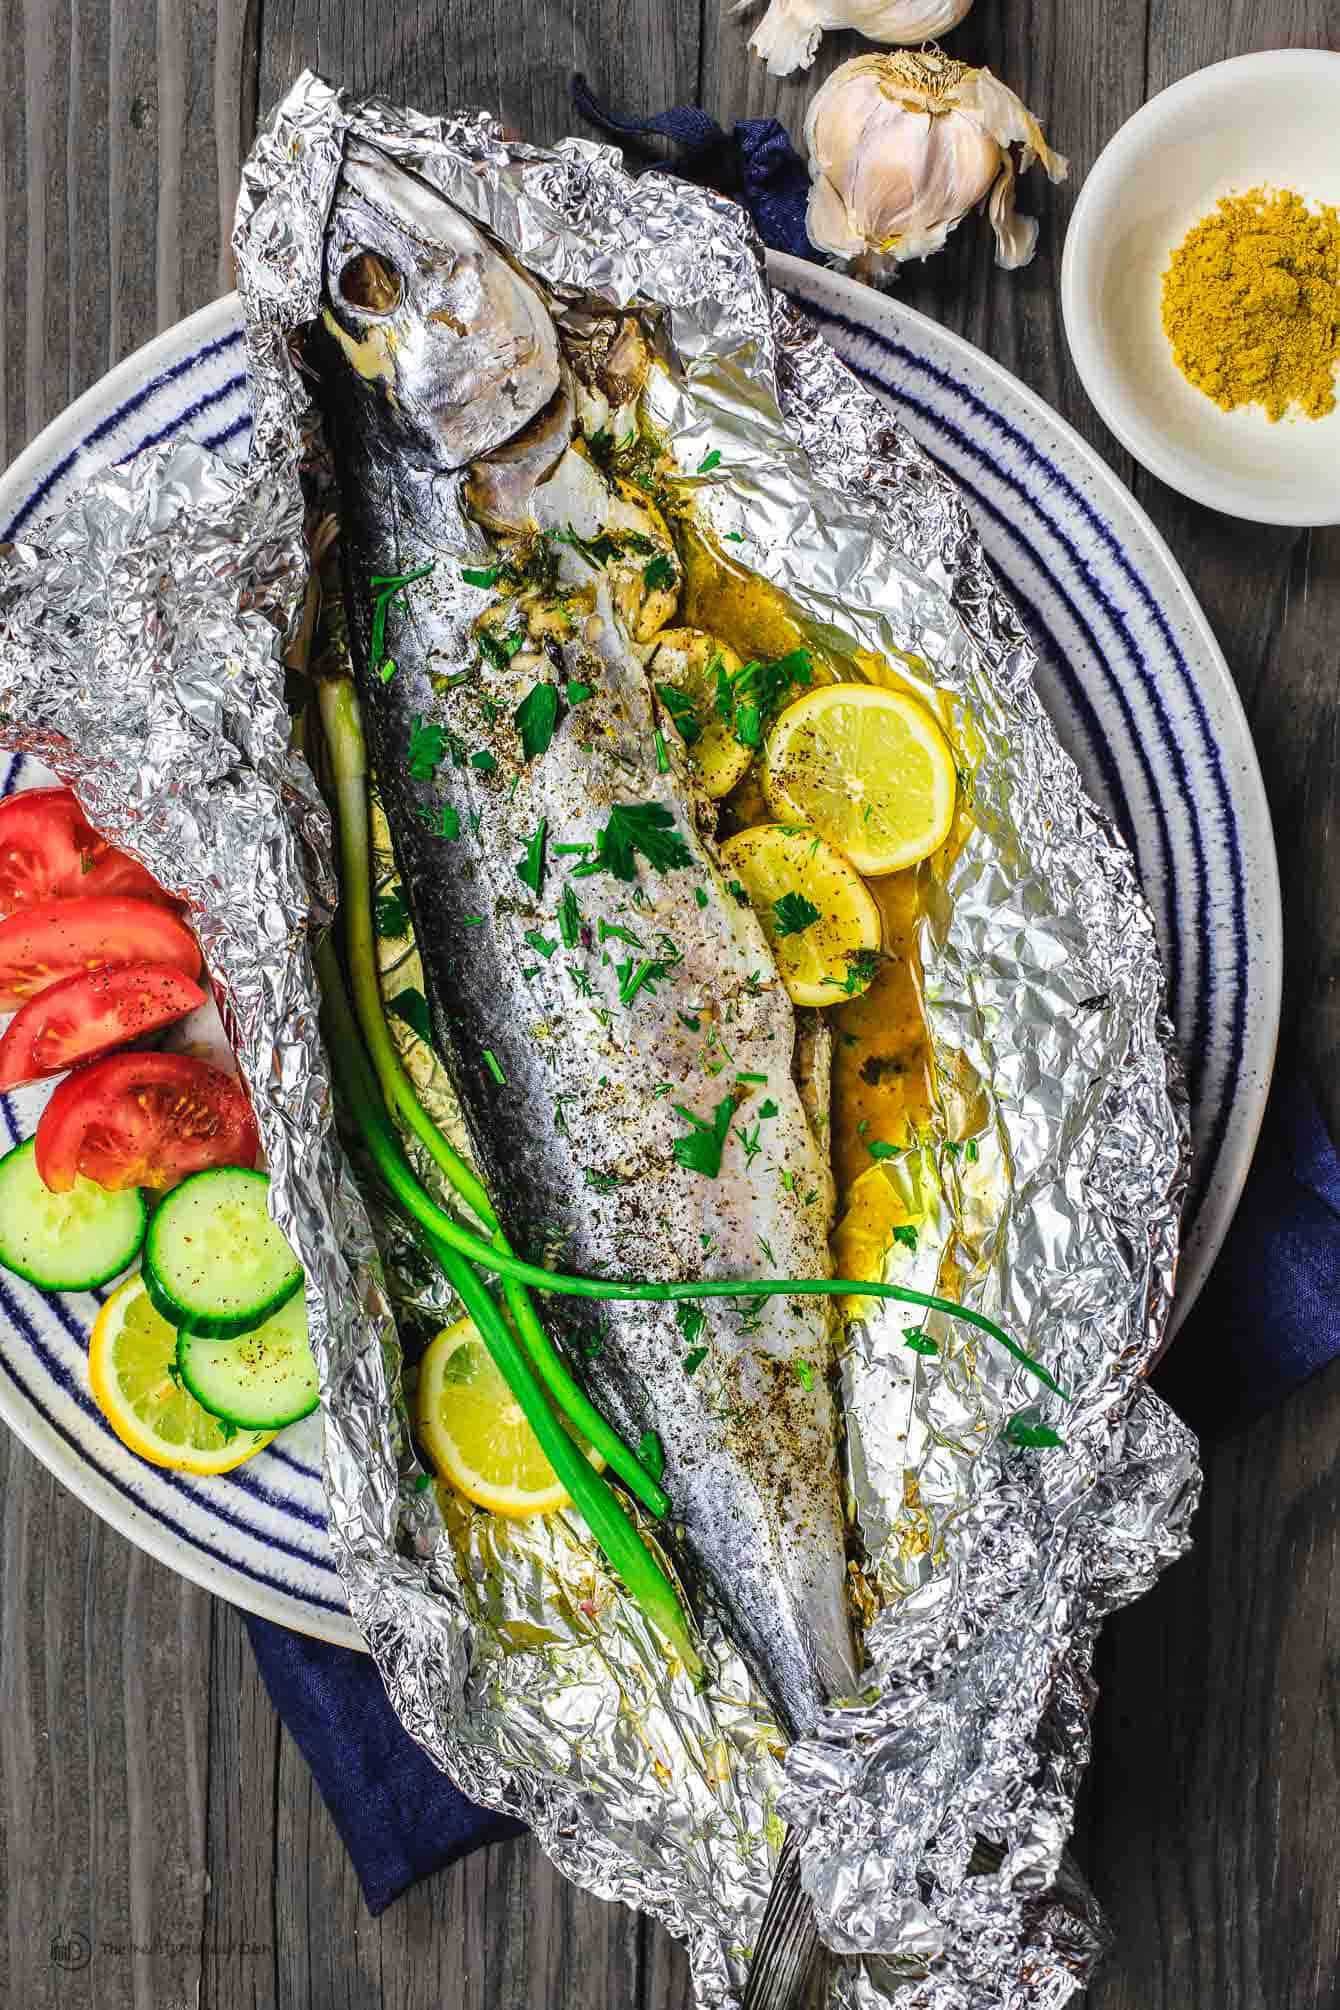 Mediterranean Oven Baked Spanish Mackerel Recipe | The Mediterranean Dish. Easy Greek inspired recipe. Whole fish stuffed with garlic, herbs, and lemon slices and oven baked in a foil packet with olive oil. A delicious Mediterranean diet recipe. See it on TheMediterraneanDish.com